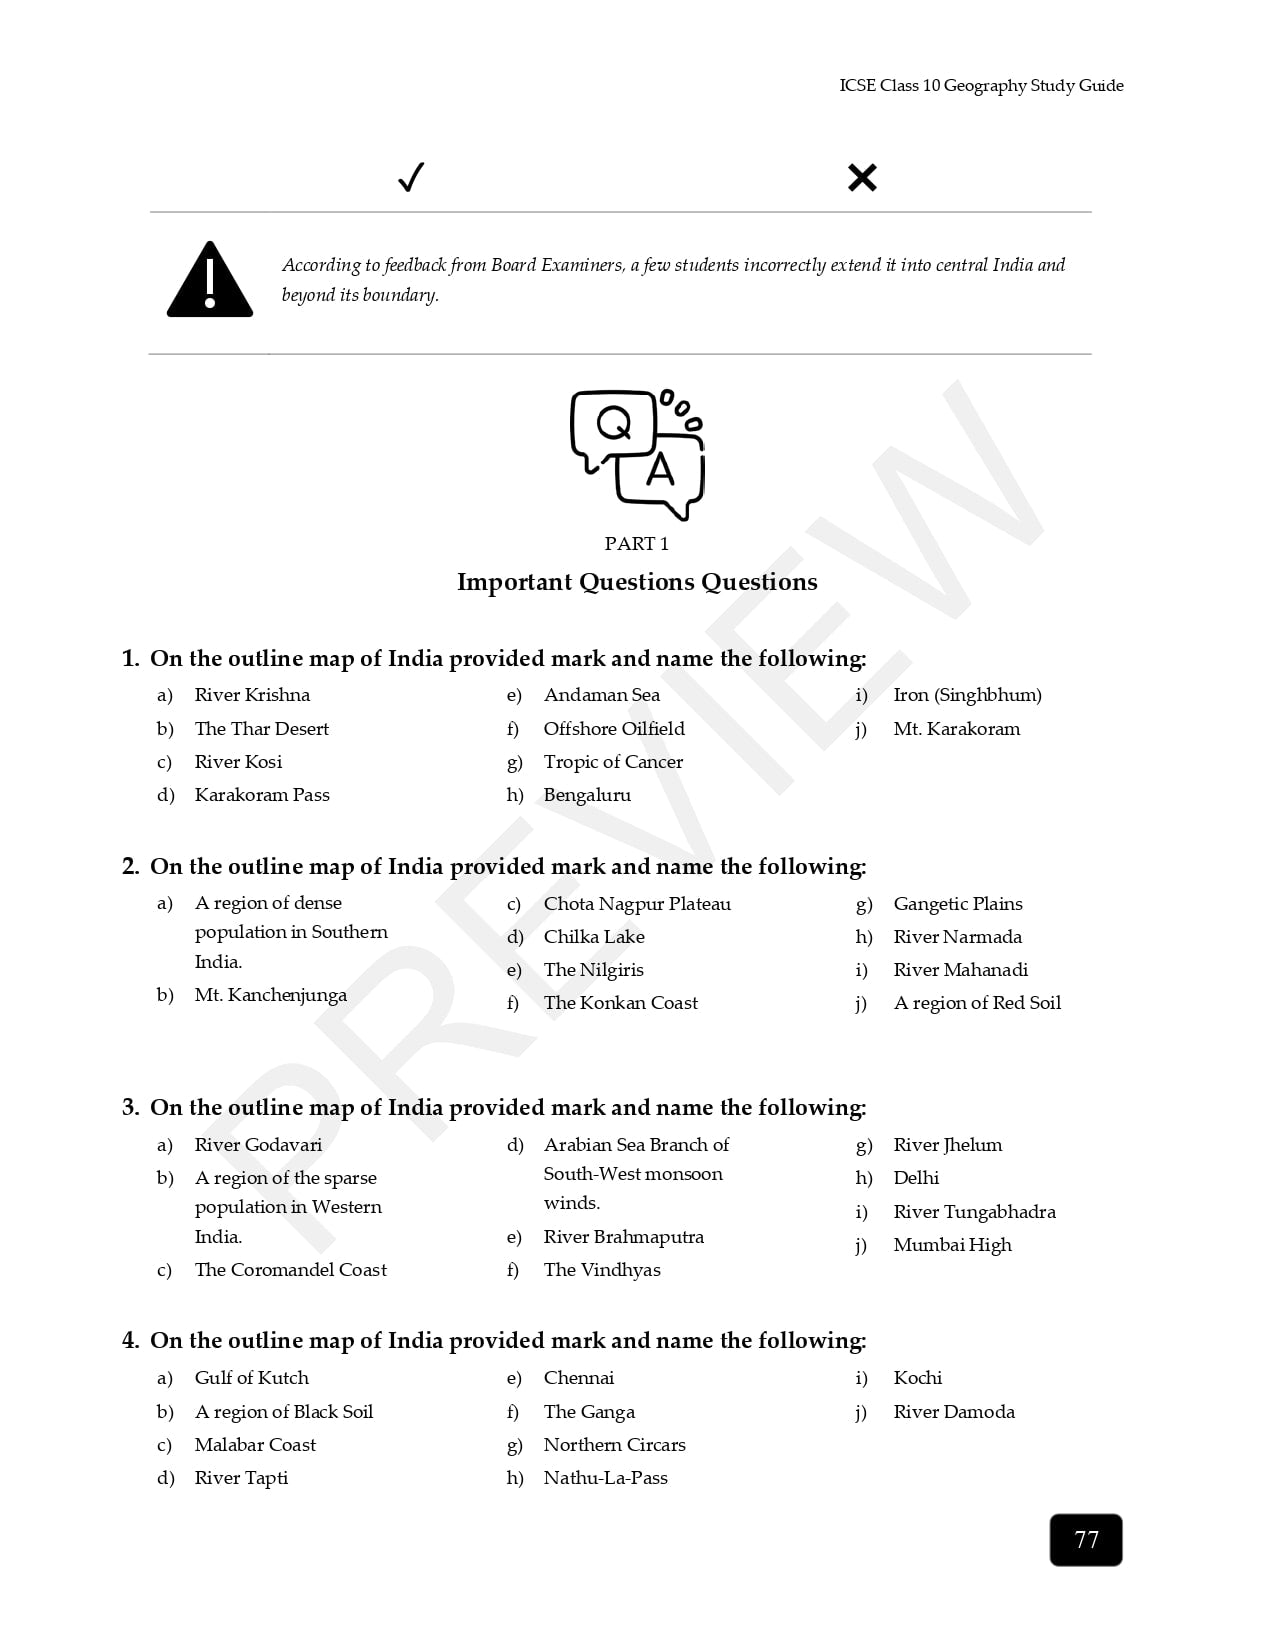 ICSE geography syllabus for class 10